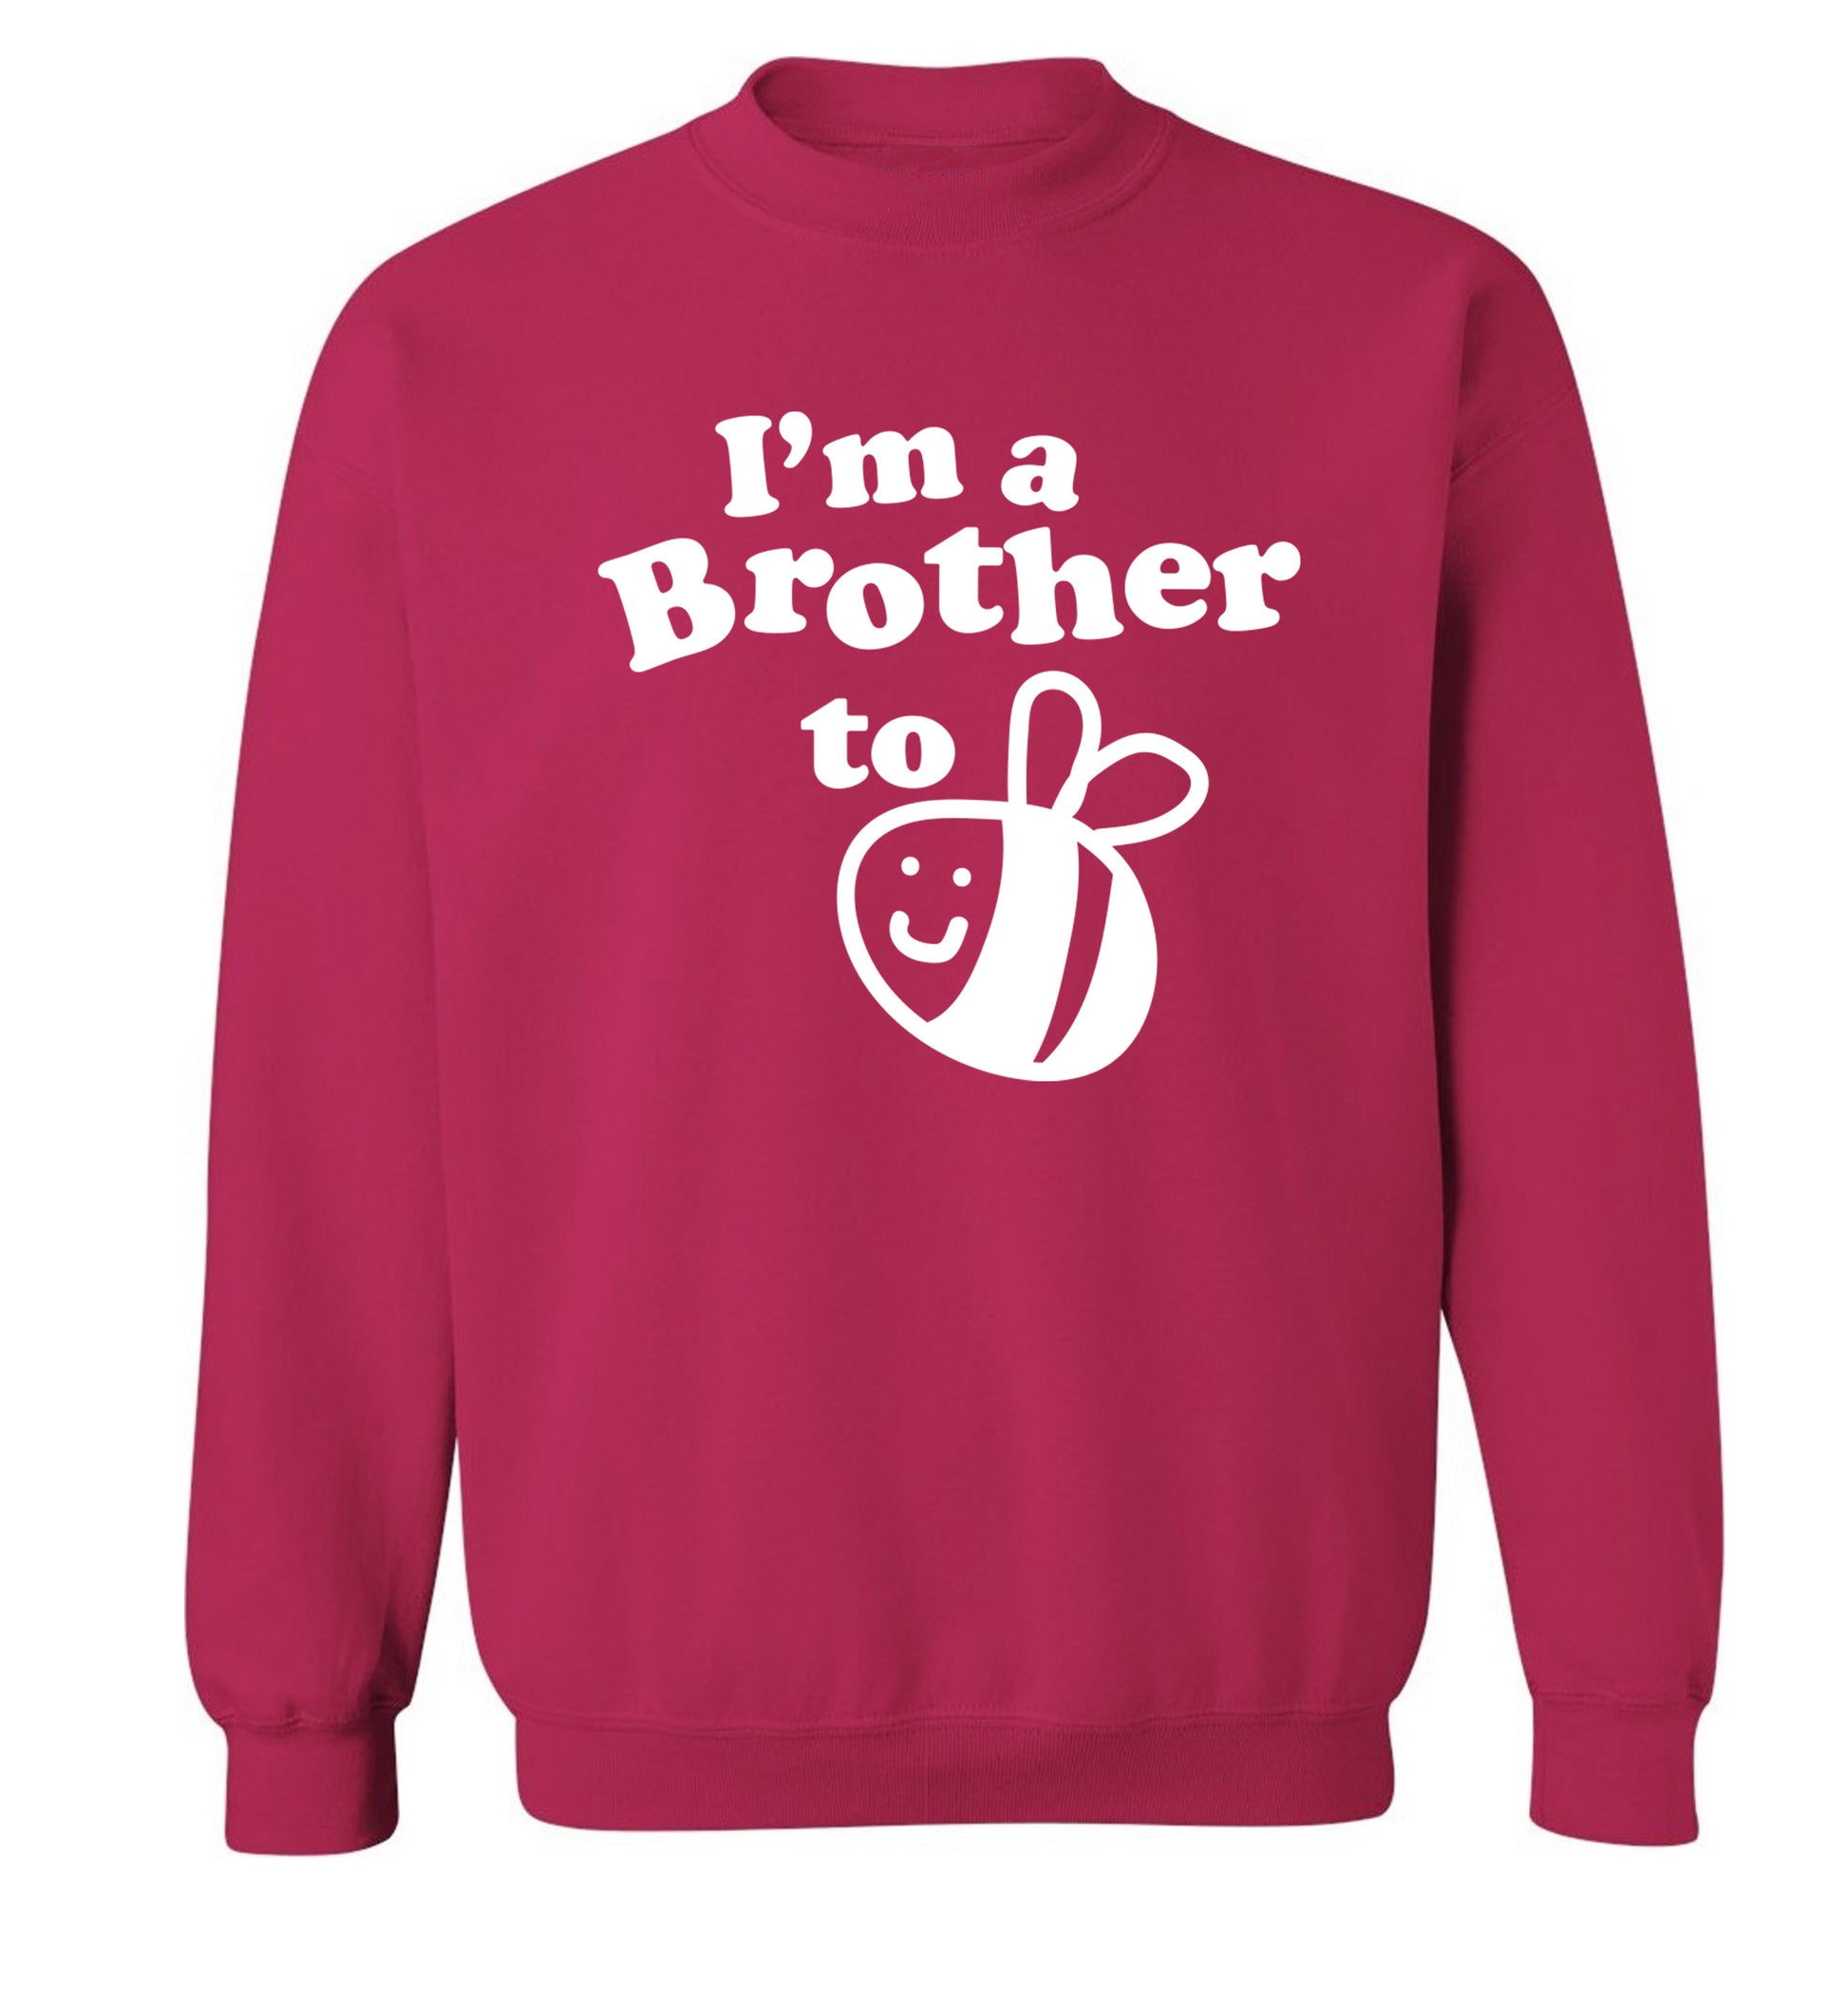 I'm a brother to be Adult's unisex pink Sweater 2XL